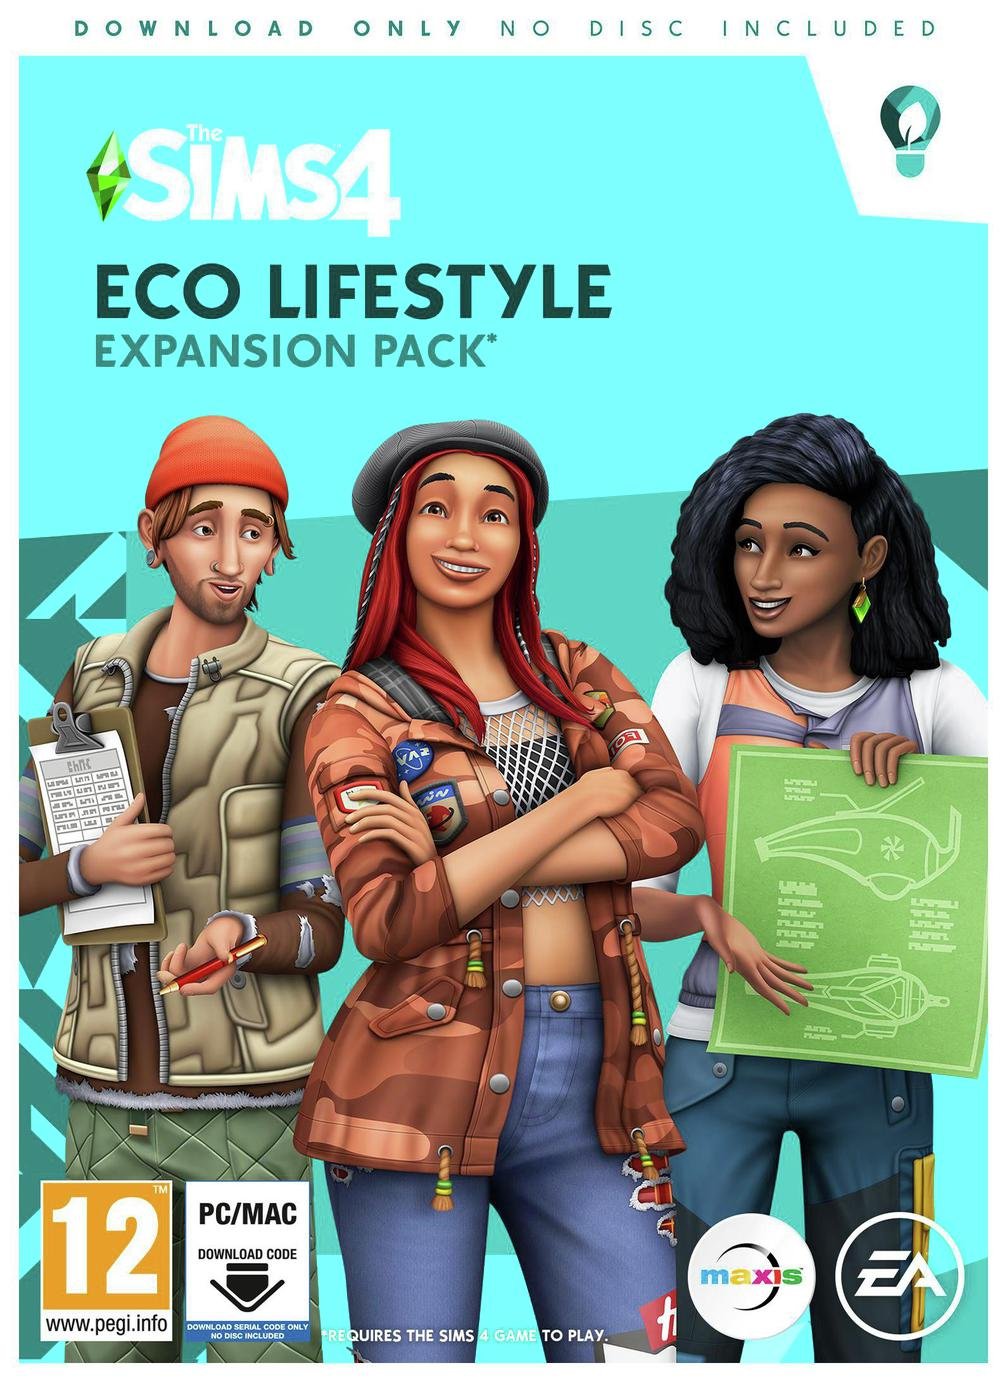 The Sims 4 Eco Lifestyle Expansion Pack PC Game